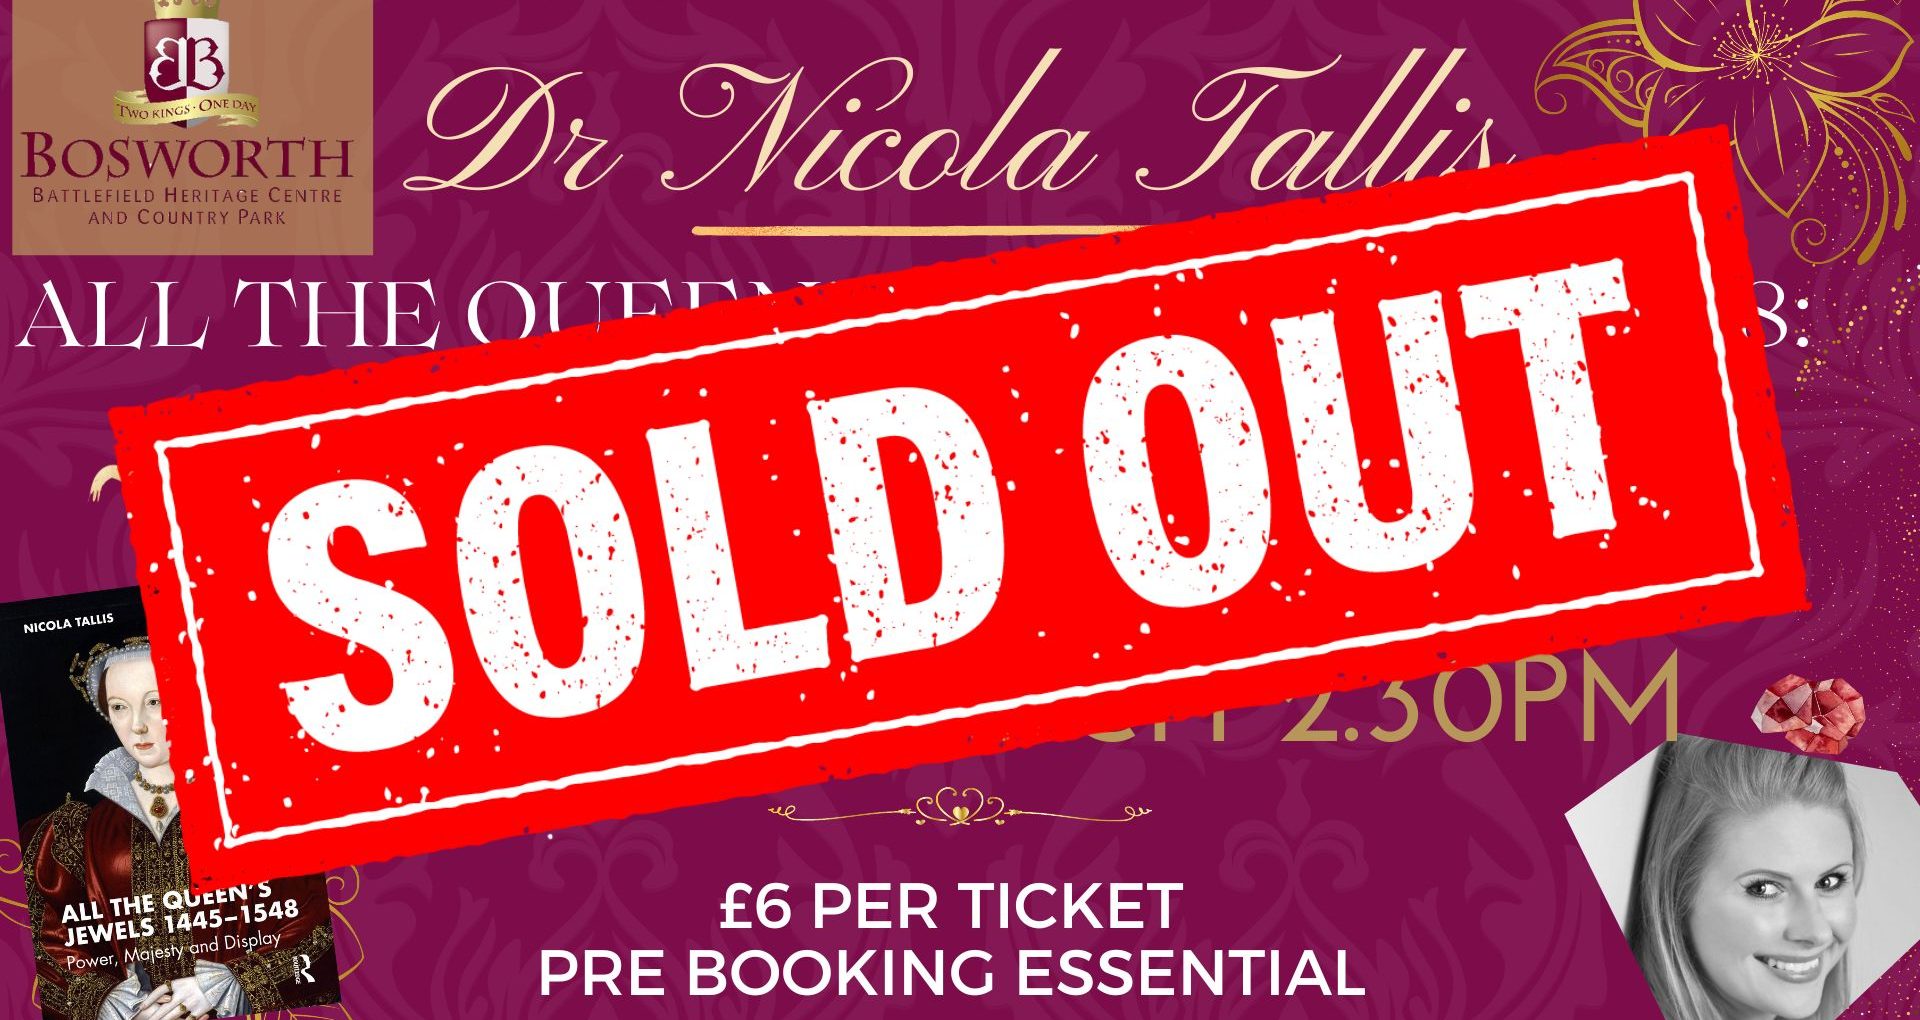 SOLD OUT! Nicola Tallis Talk - All the Queen’s Jewels 1445-1548: Power, Majesty and Display